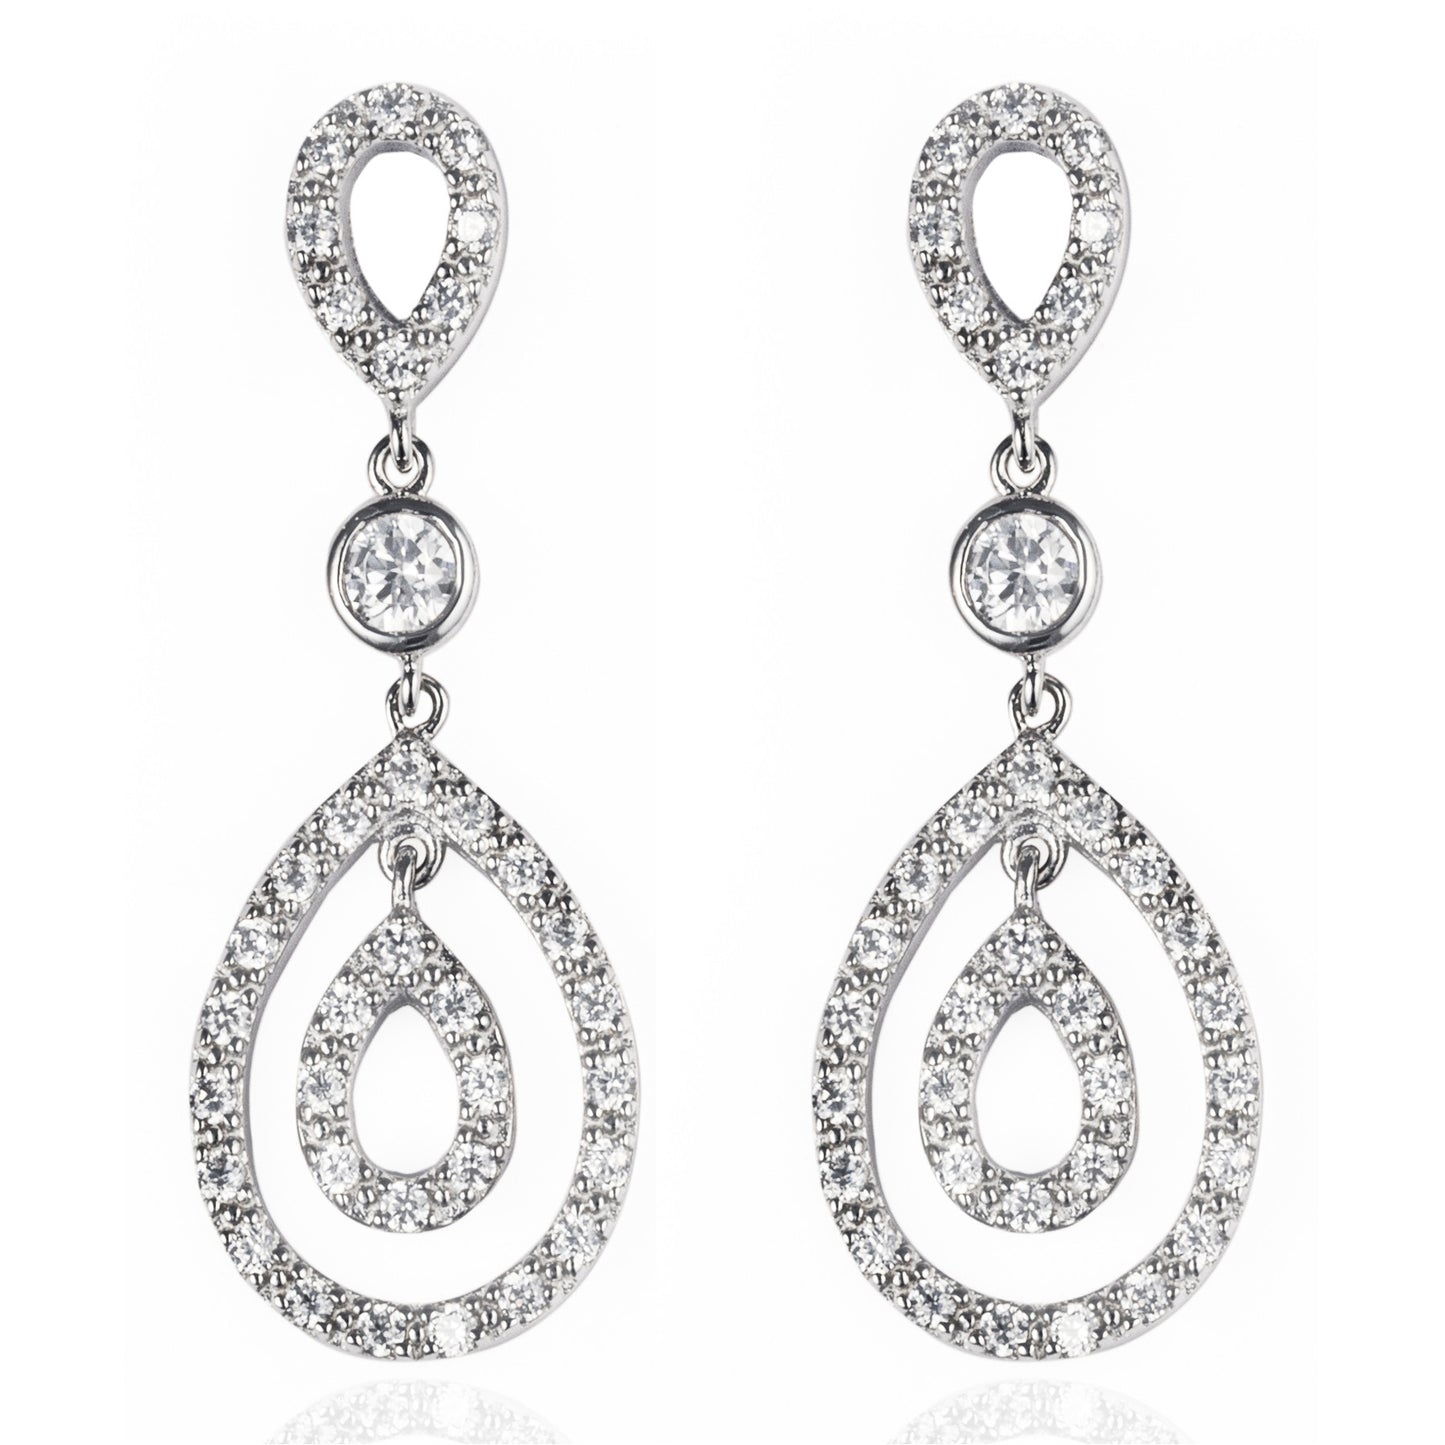 The elegant hanging Audrey Earrings are made of 925 sterling silver and feature many cubic zirconia stones for a glamorous look. Shop luxury jewellery online by Bellagio & Co. Worldwide shipping.